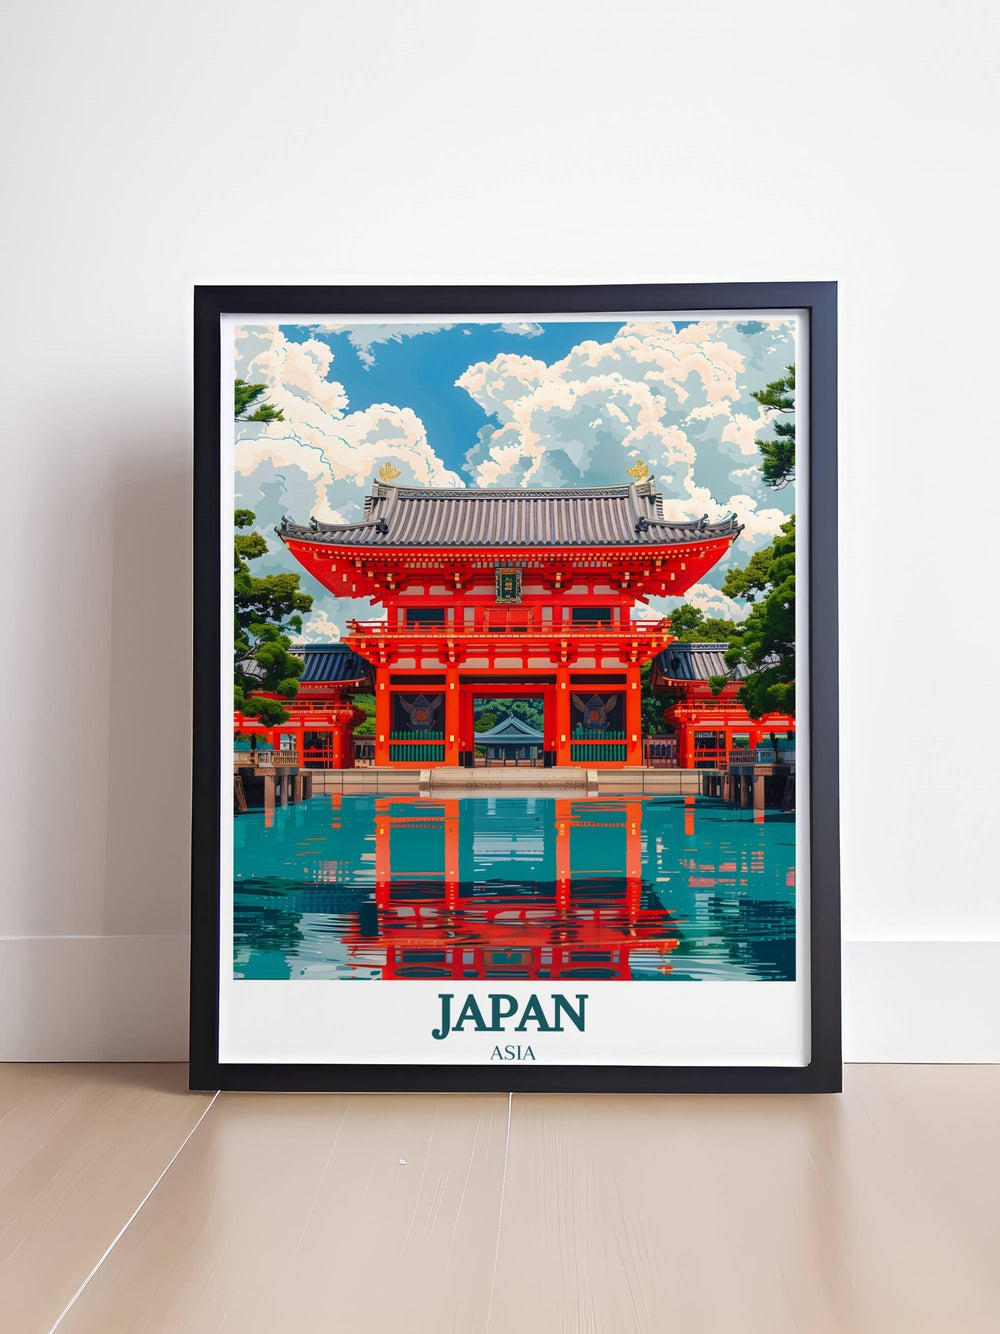 Vibrant watercolor print of cherry blossoms in full bloom with the Itsukushima Shrine's torii gate subtly appearing through the flowers.